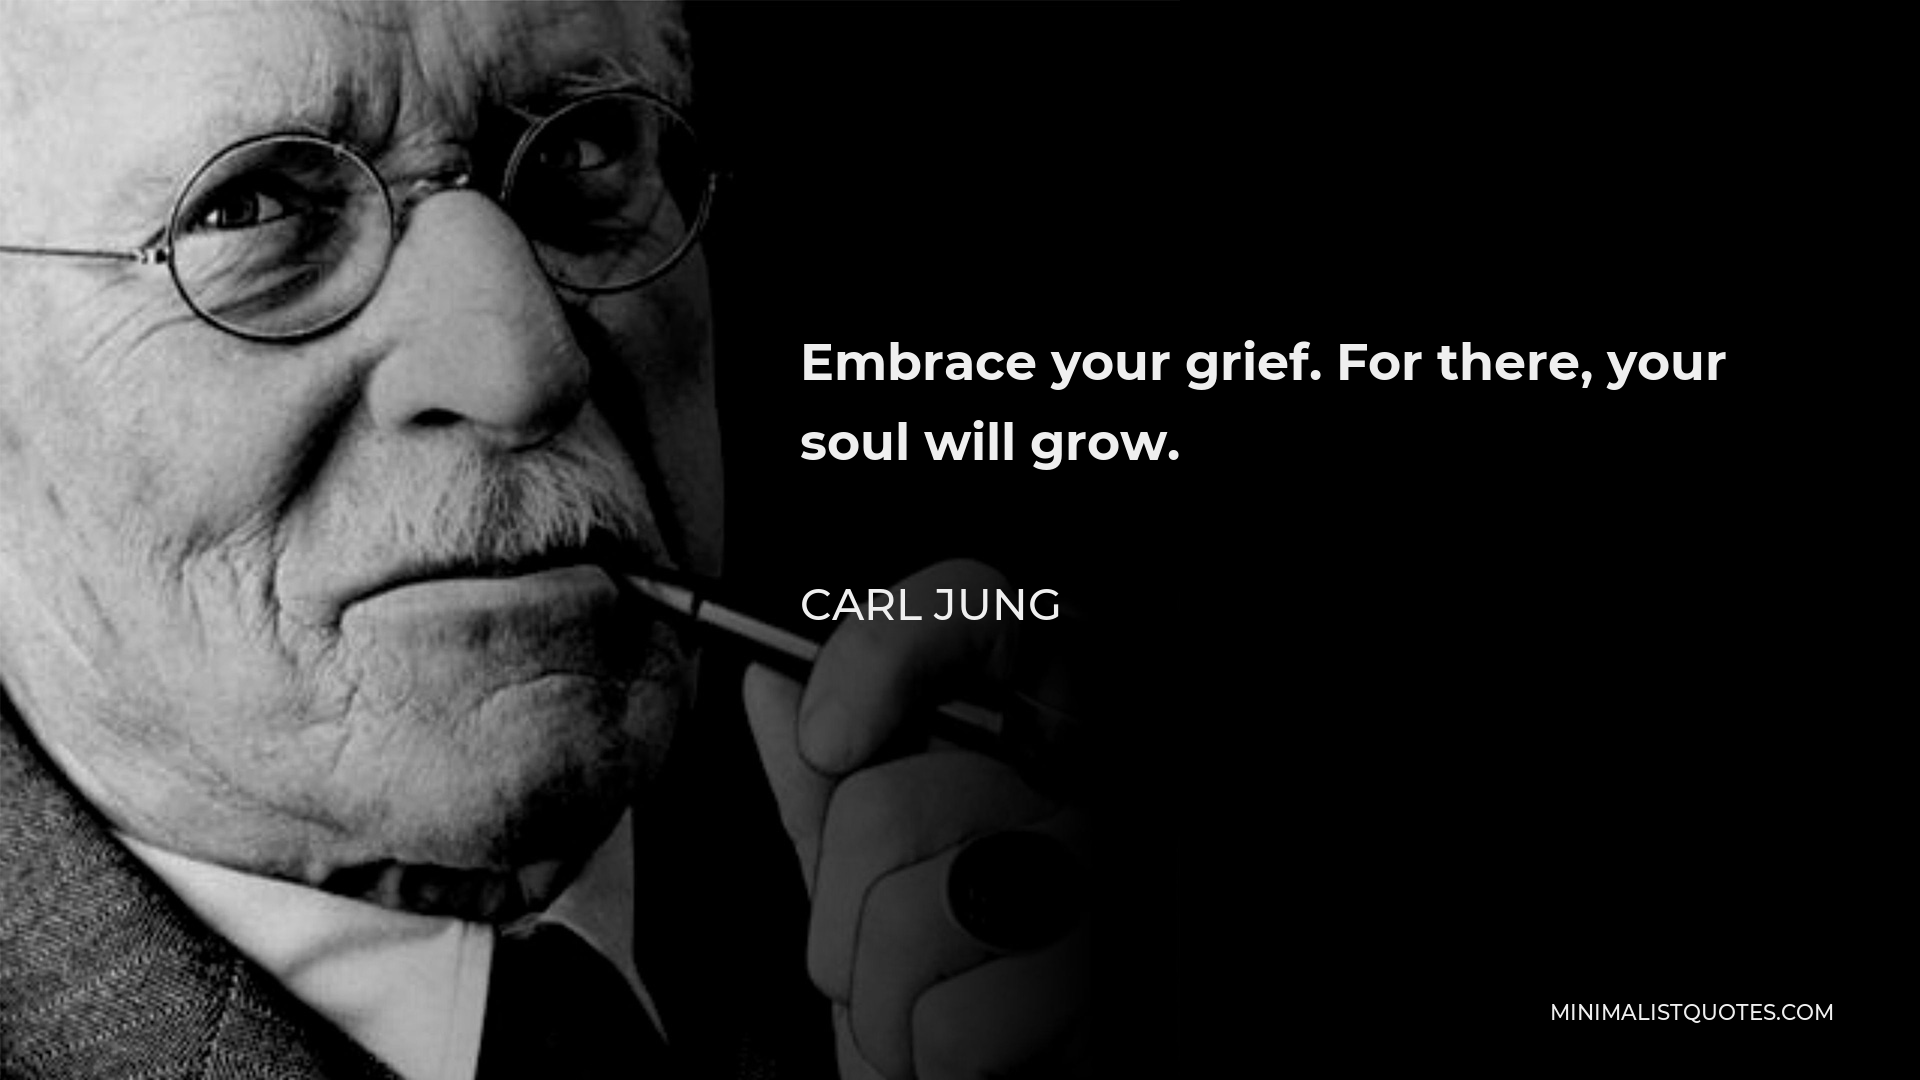 Carl Jung Quote - Embrace your grief. For there, your soul will grow.